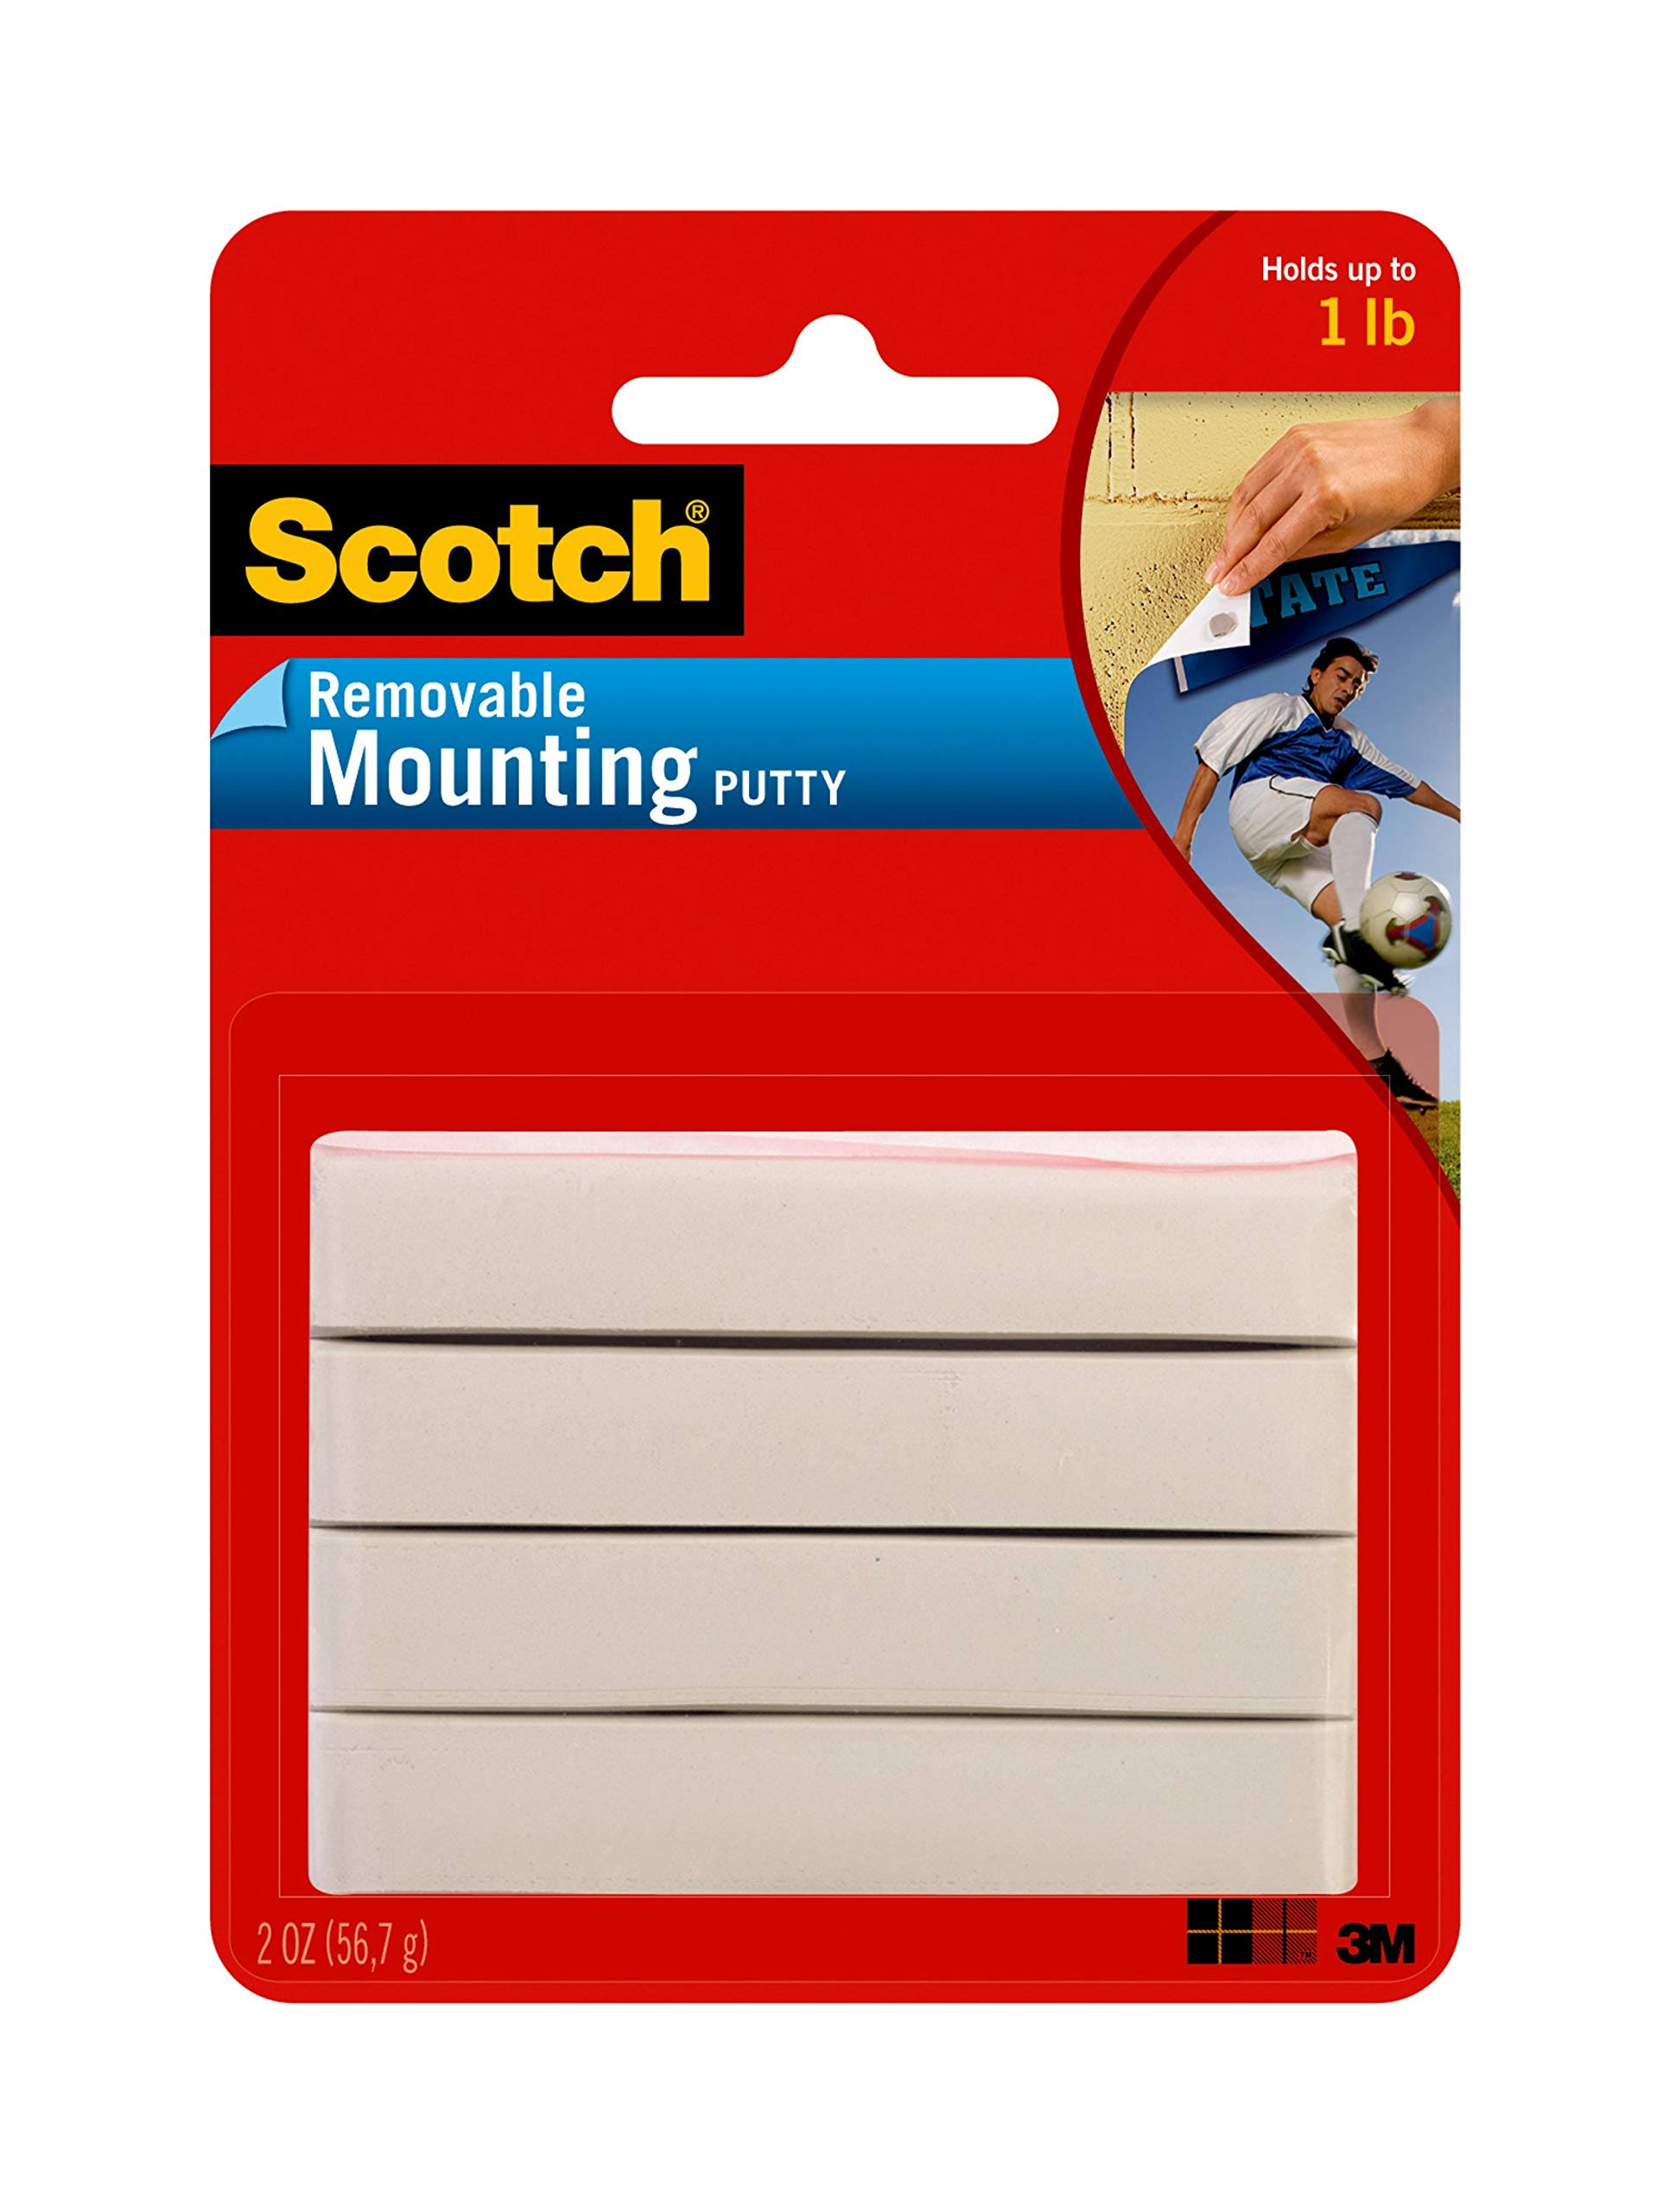 Scotch Mounting Putty Adhesive - Removable, 2oz, White